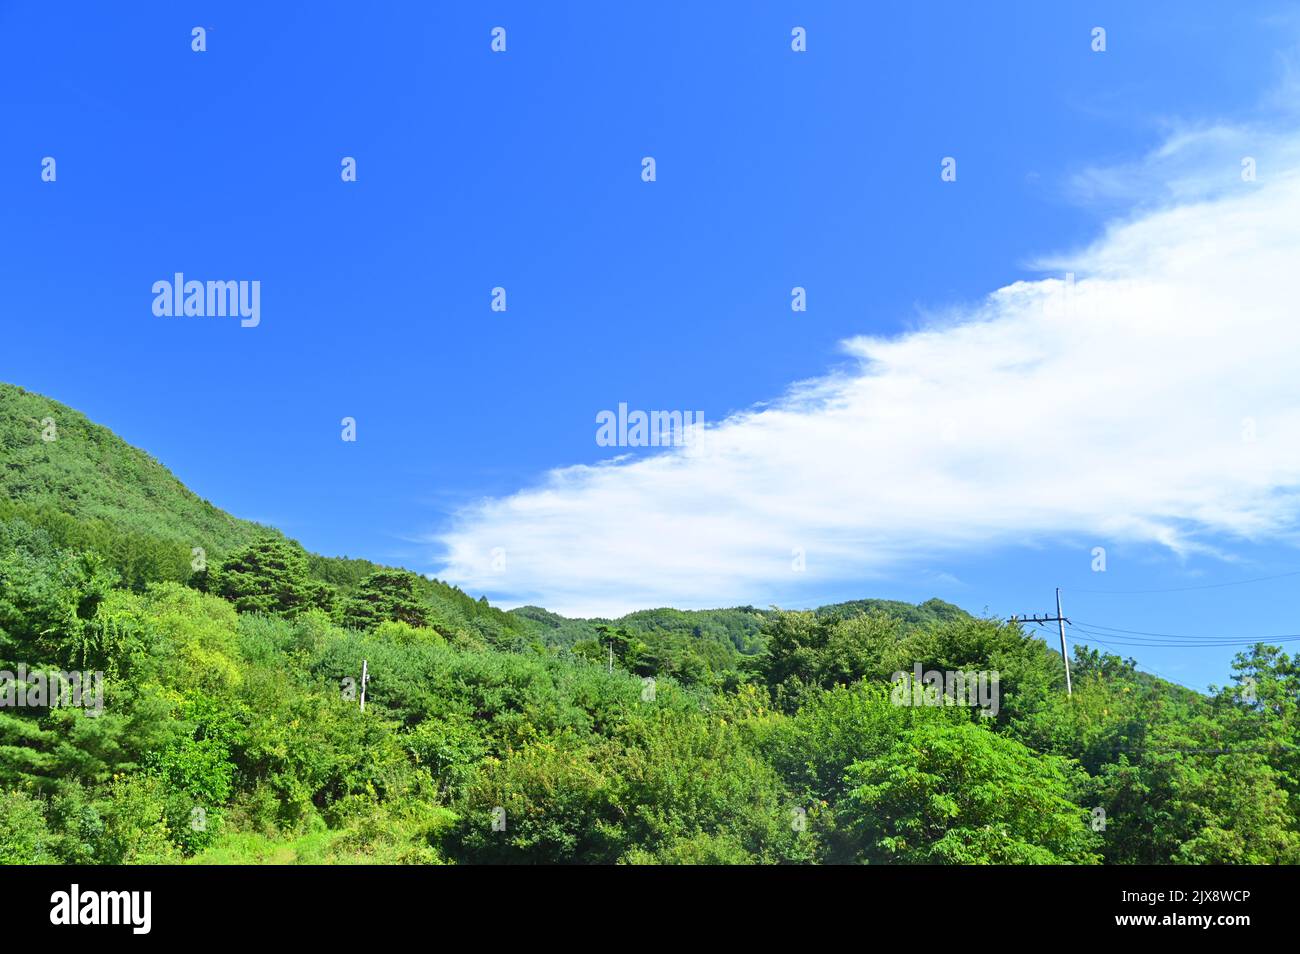 There is a blue mountain and white clouds cross the clear sky Stock Photo